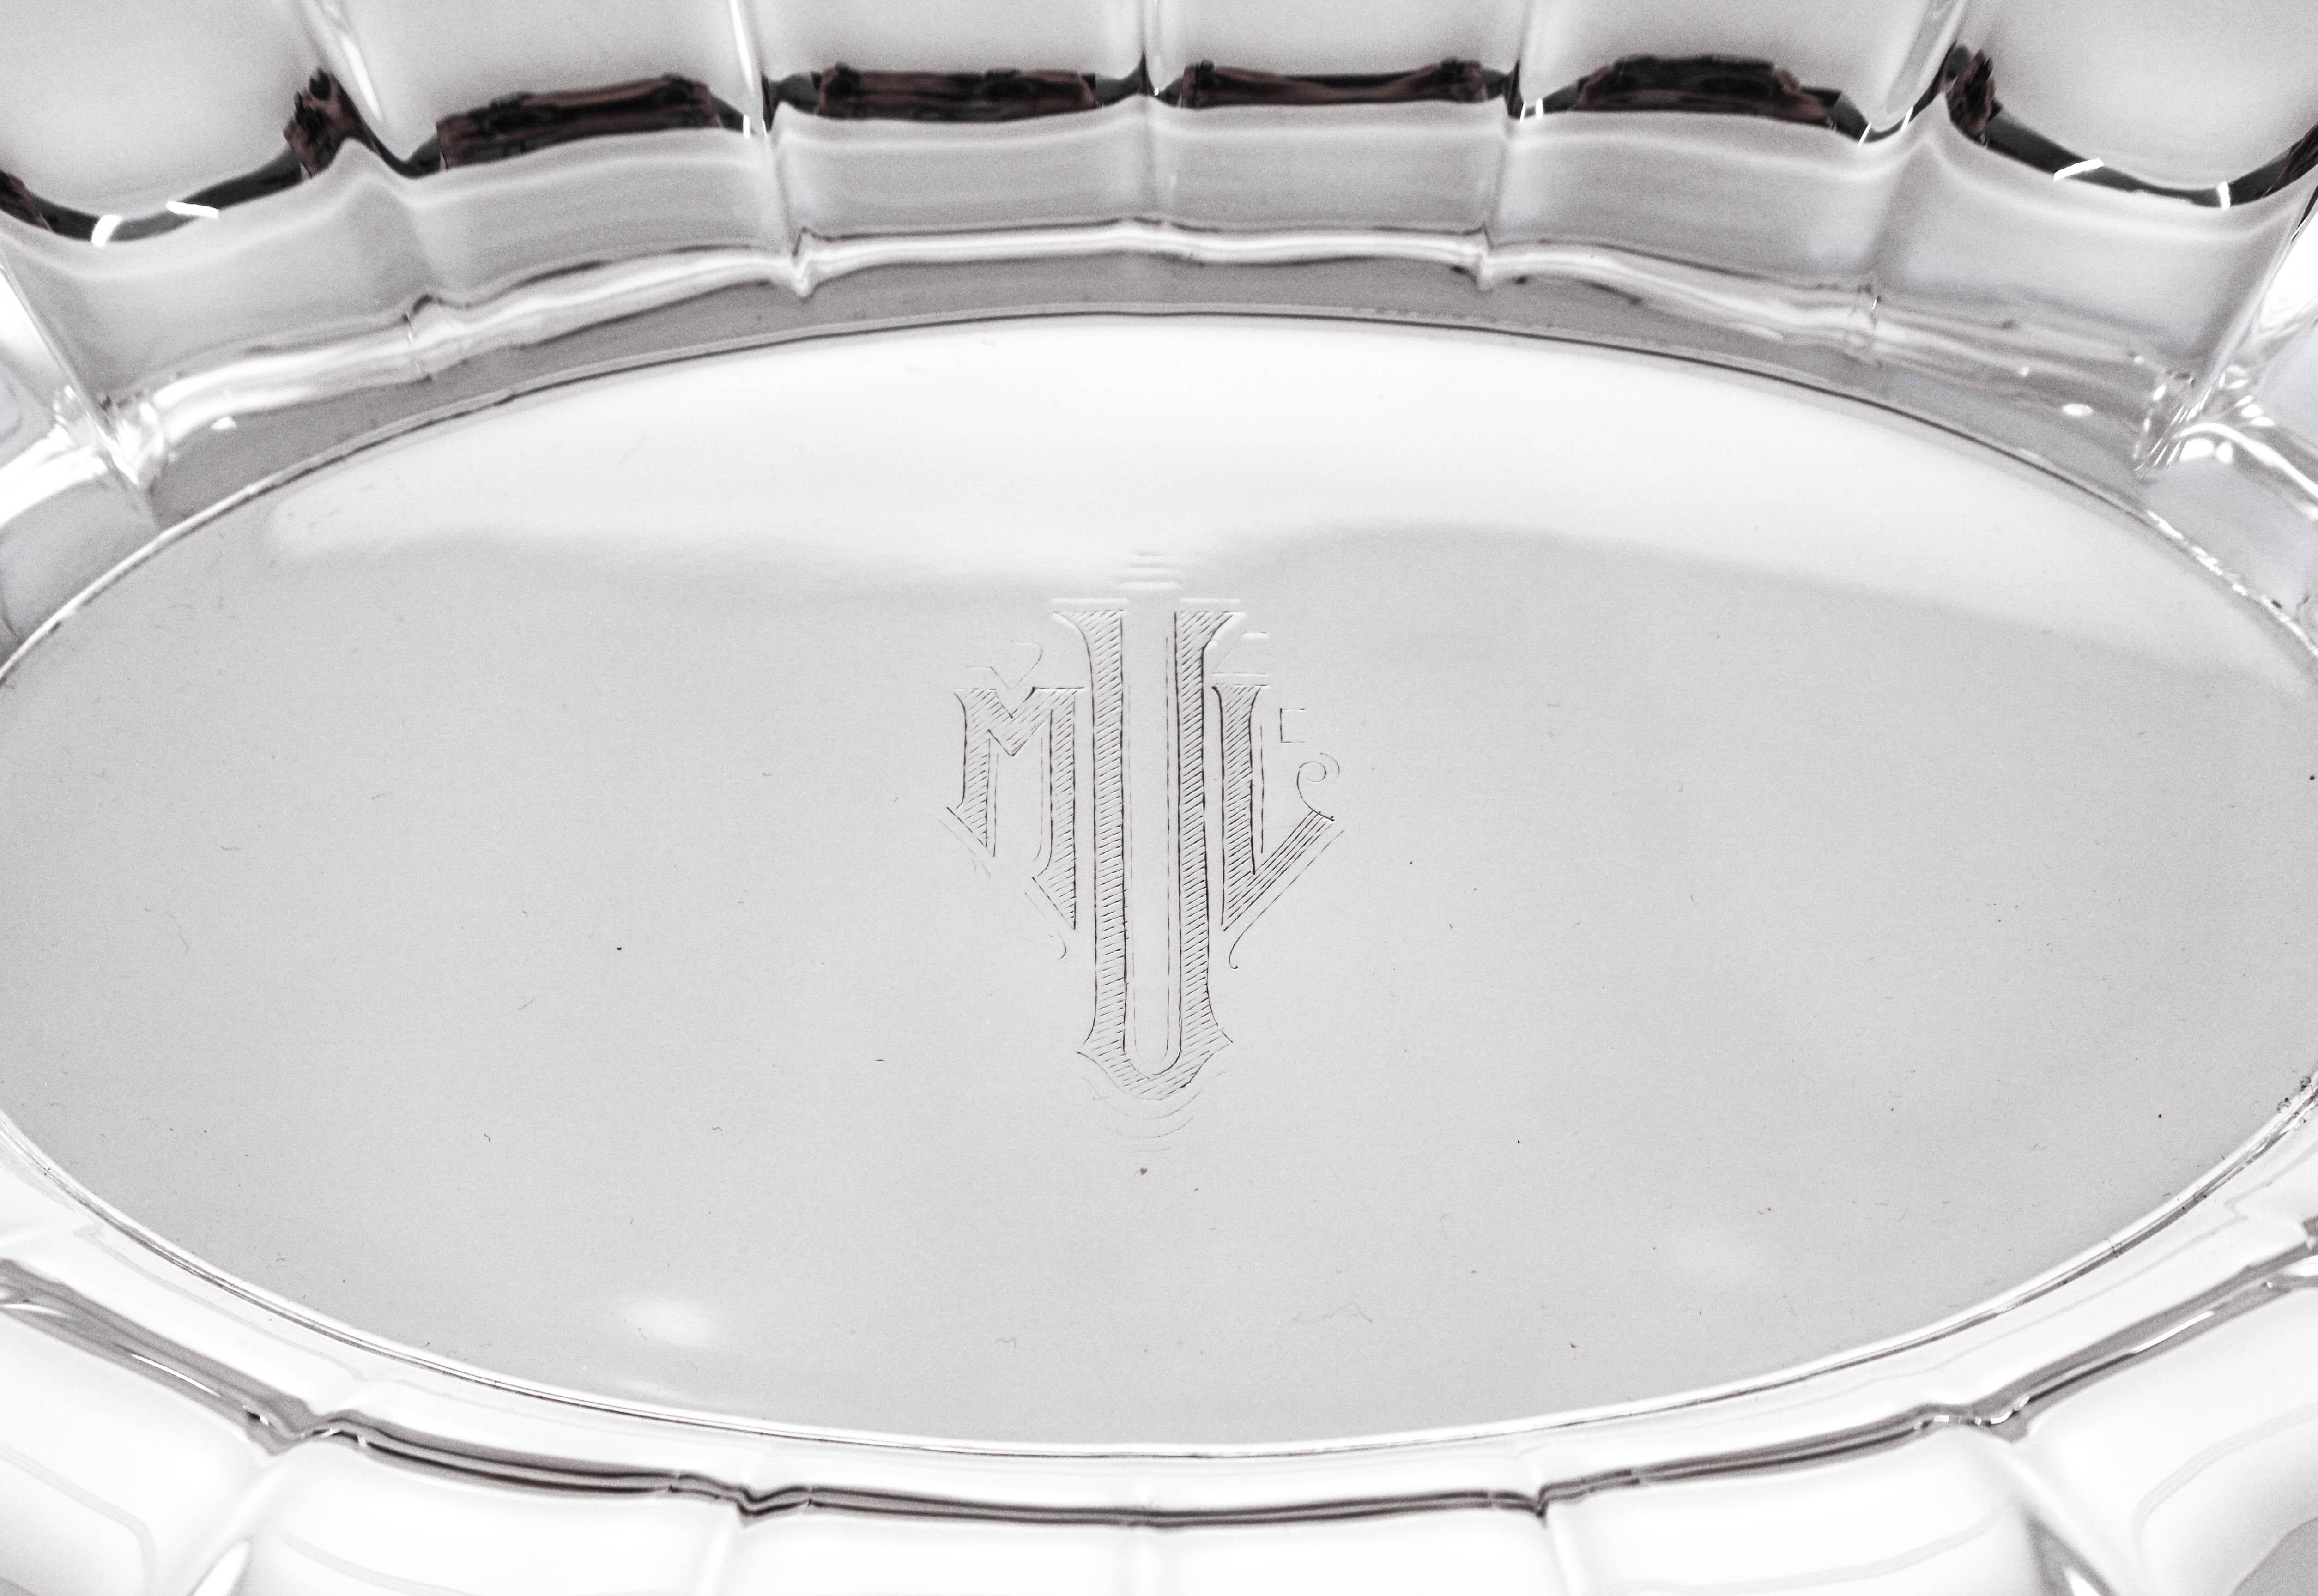 This sterling silver breadbasket has a scalloped rim and flares up on each end. The centre is completely flat which is perfect for serving. In the centre there is an Art Deco Hans engraved monogram. It’s the perfect size for cookies or biscottis.